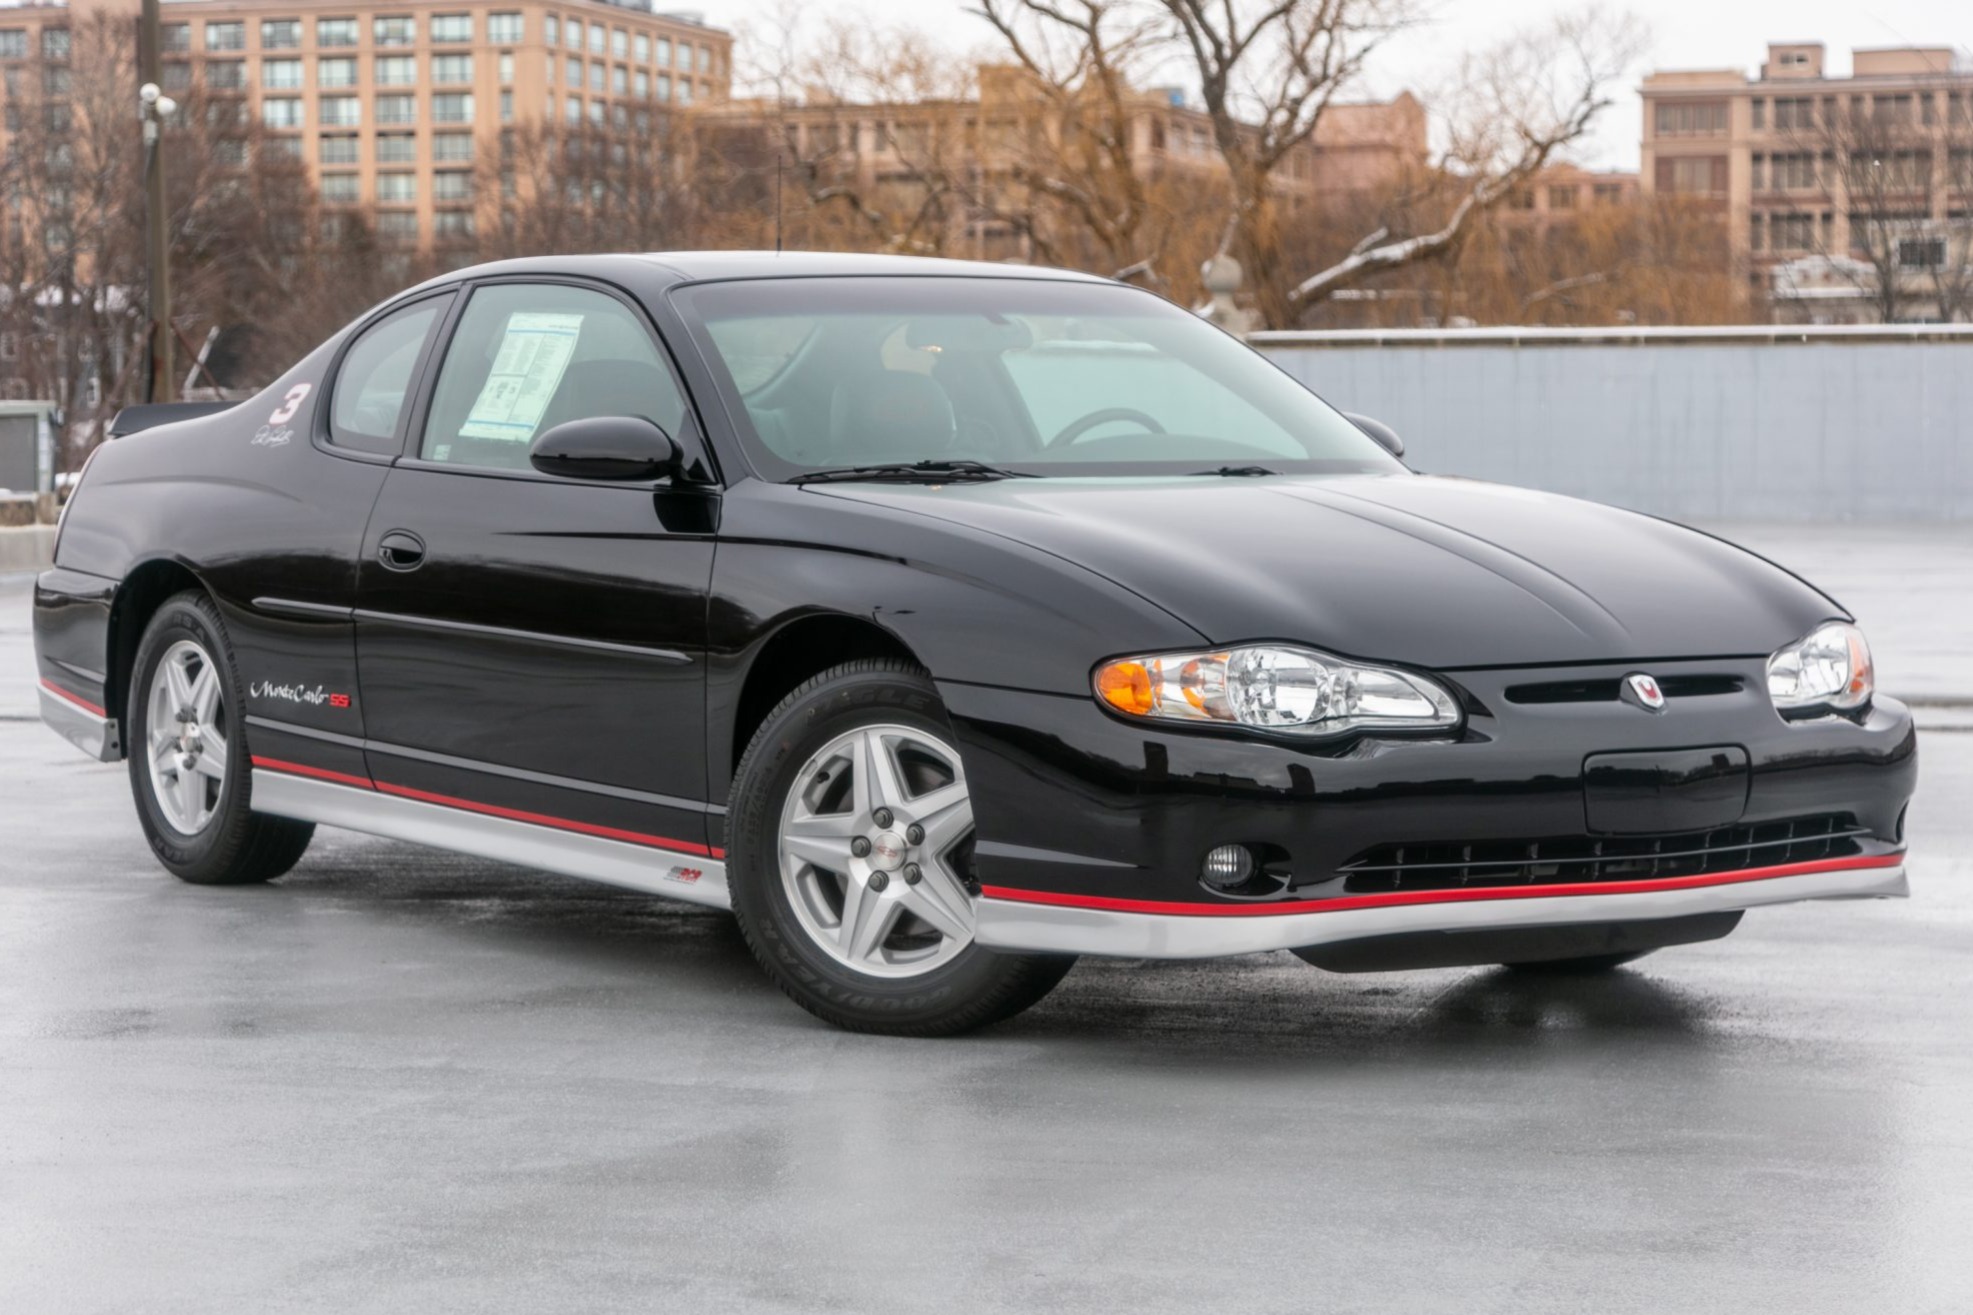 27-Mile 2002 Chevrolet Monte Carlo SS Intimidator for sale on BaT Auctions  - closed on February 22, 2021 (Lot #43,545) | Bring a Trailer